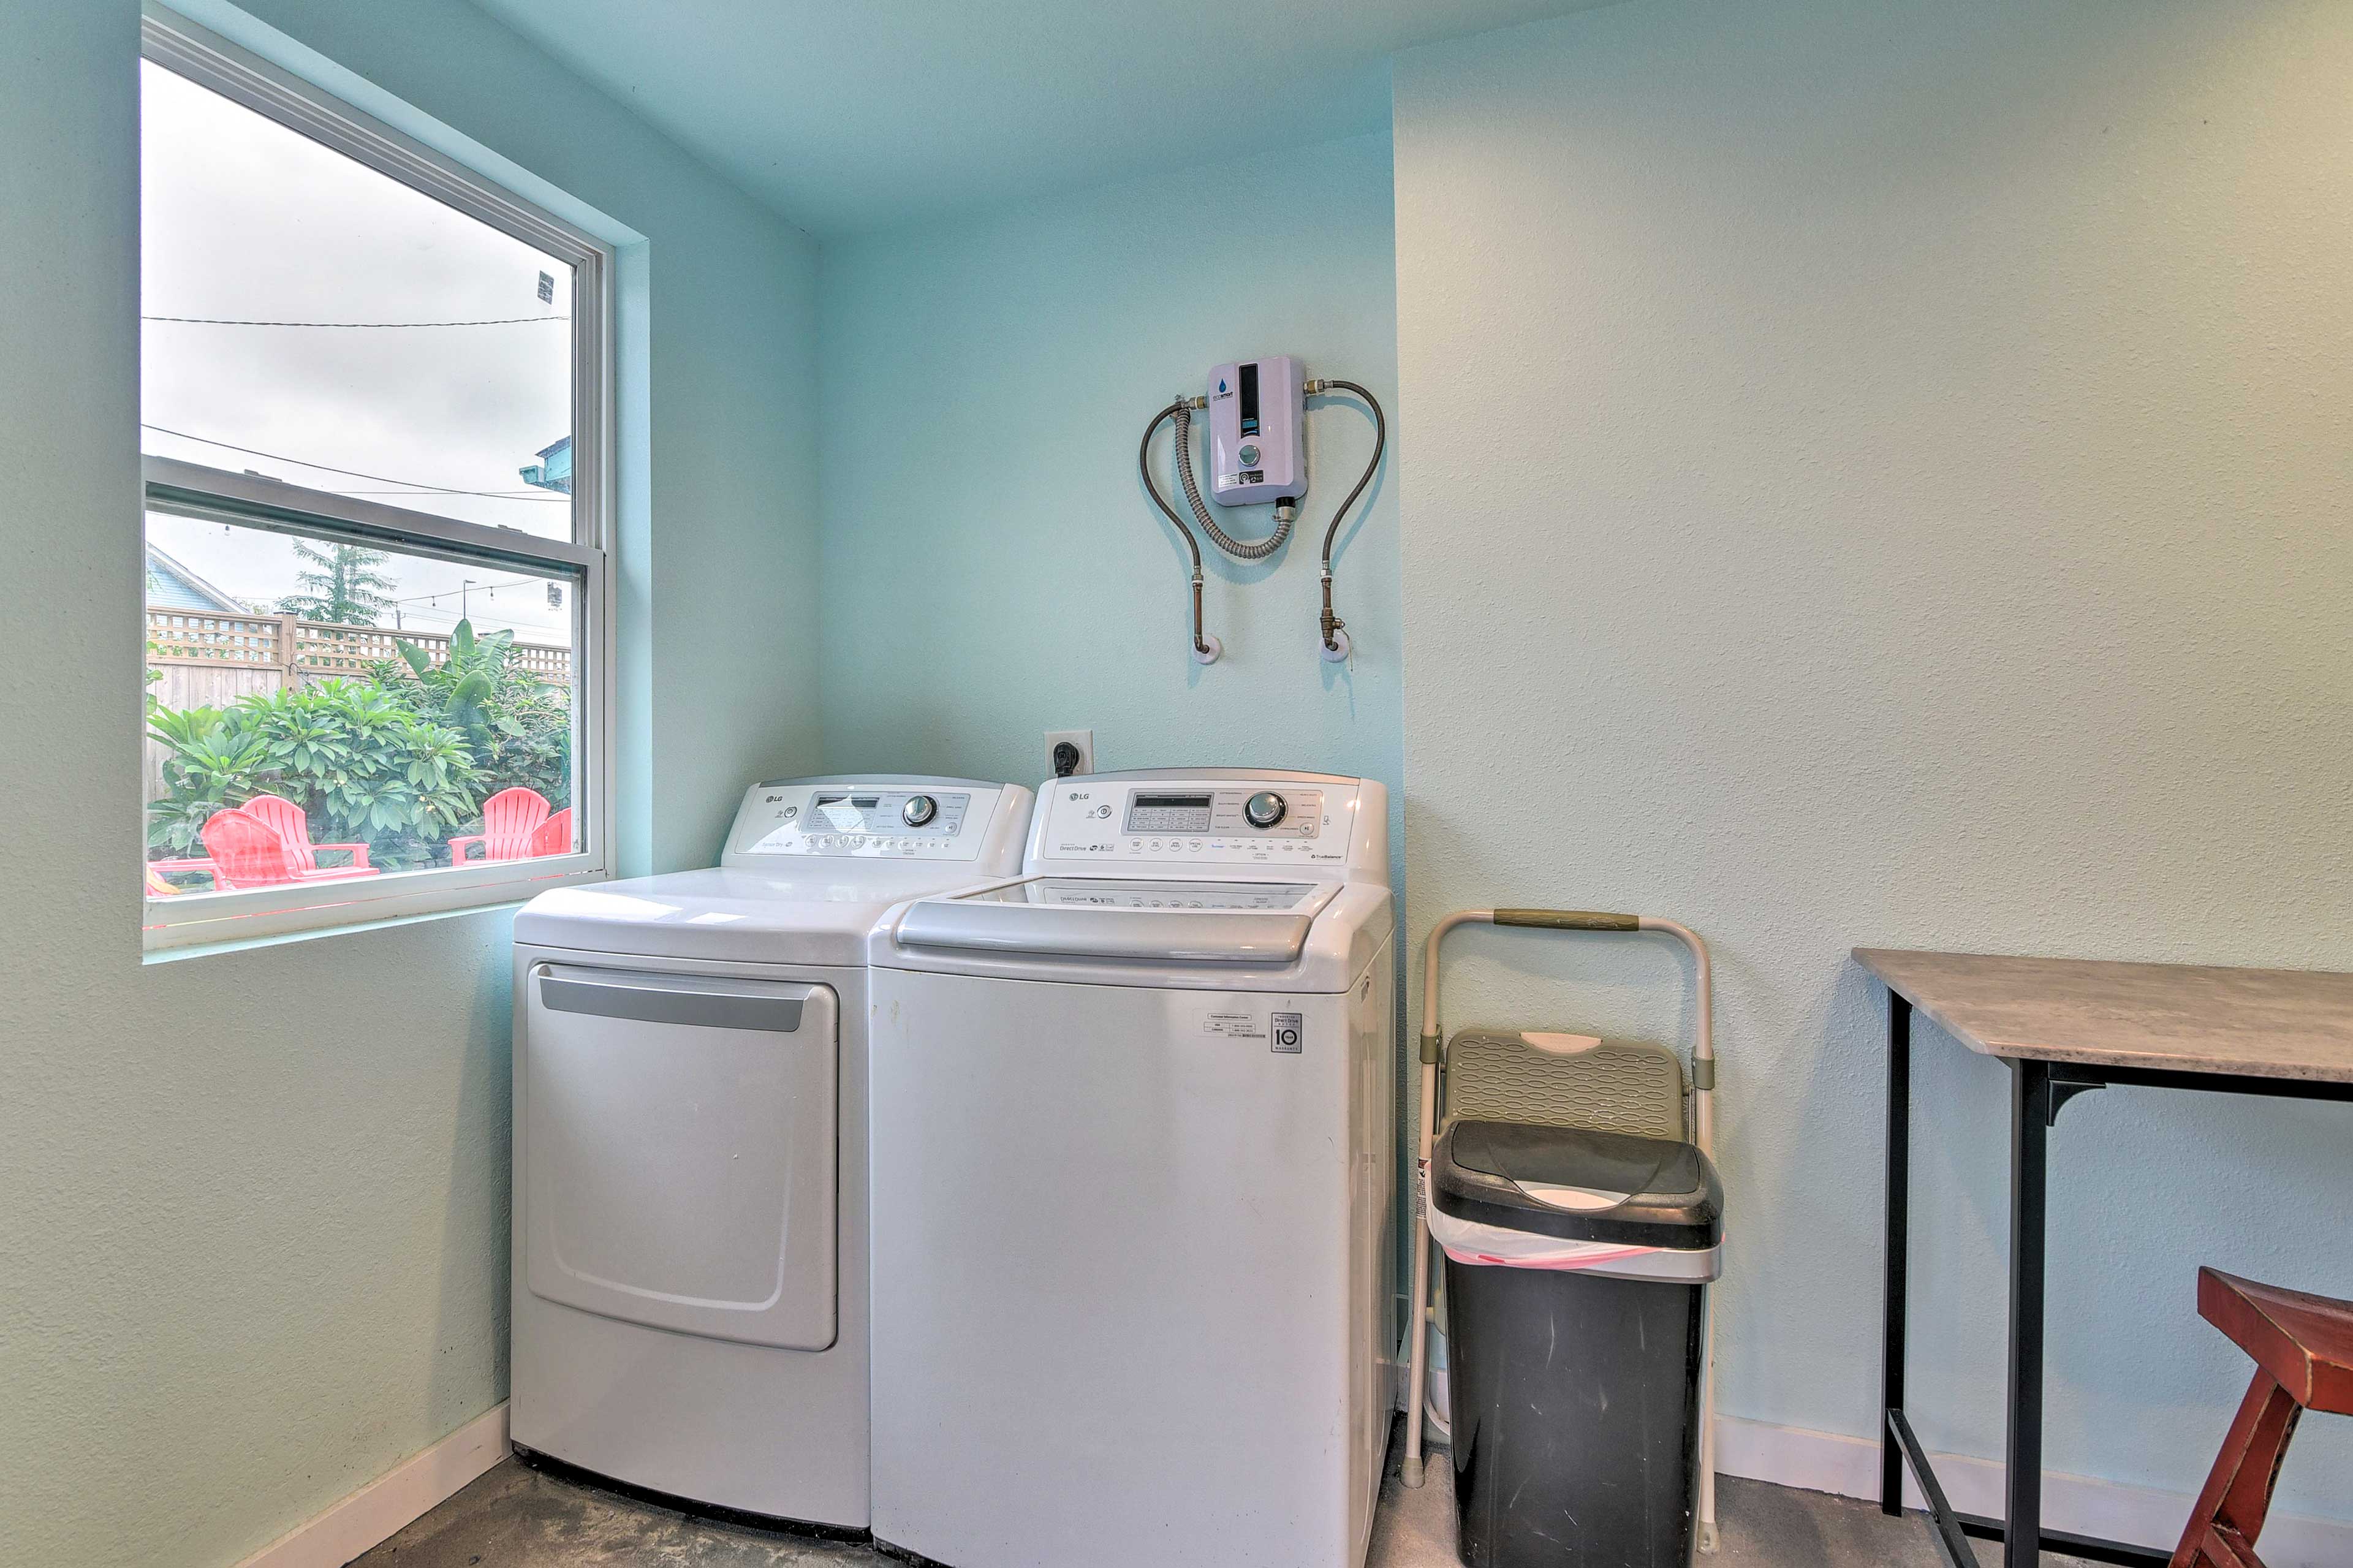 Detached Laundry Shed | Interior | Washer + Dryer